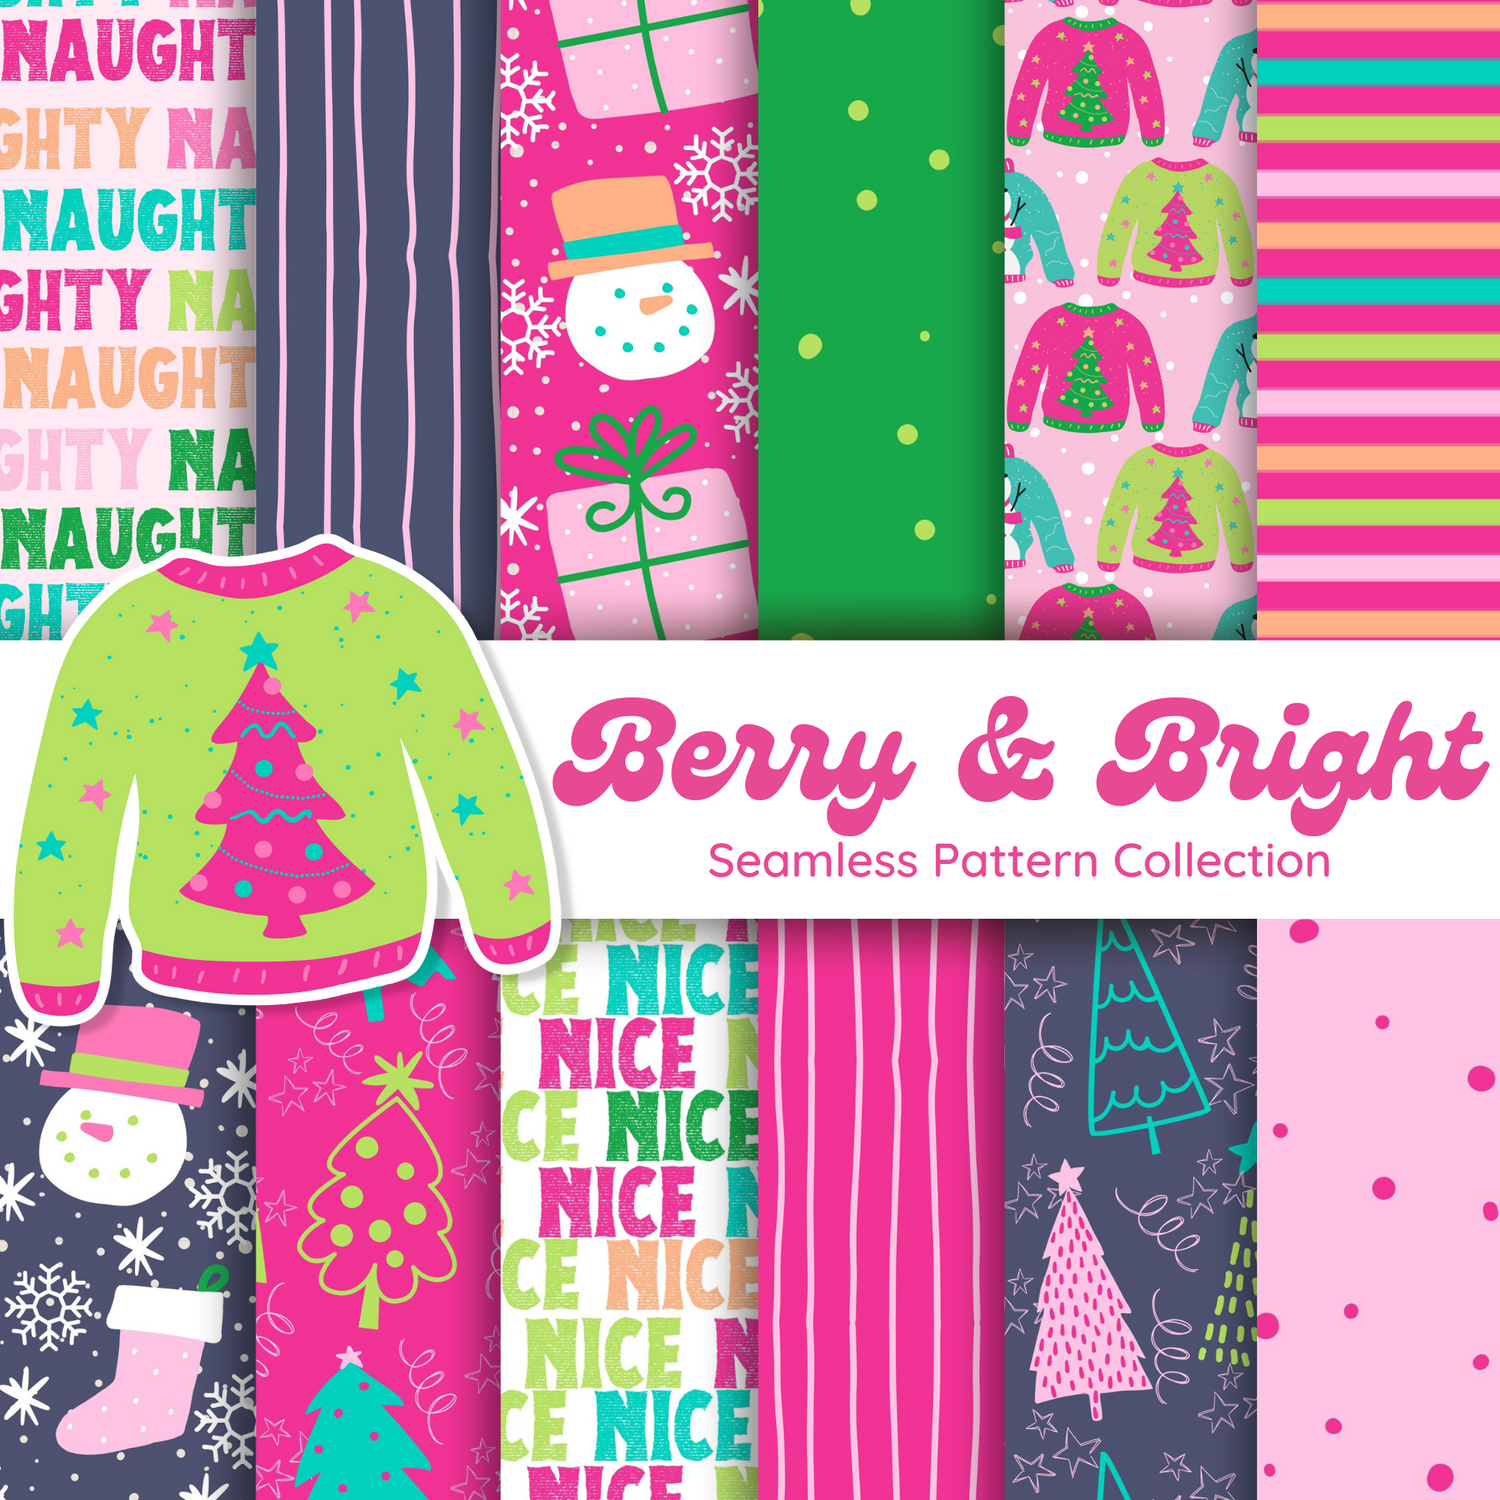 "Berry & Bright" Pattern Collection